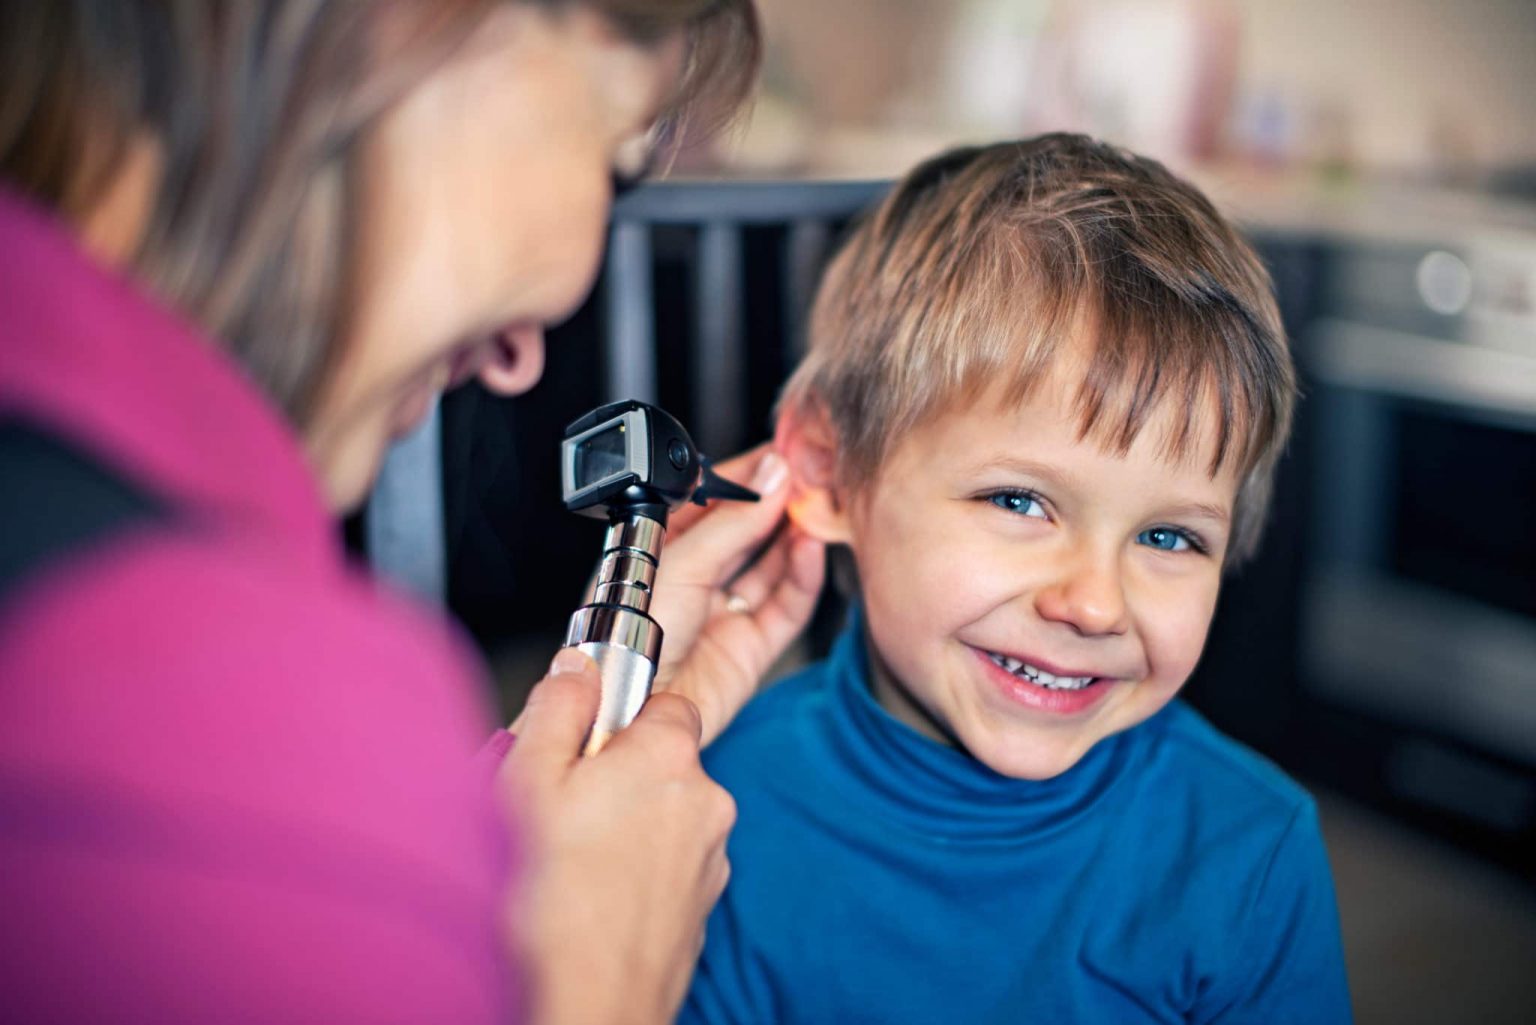 ENT checks child patients ears to determine ear tube effectiveness